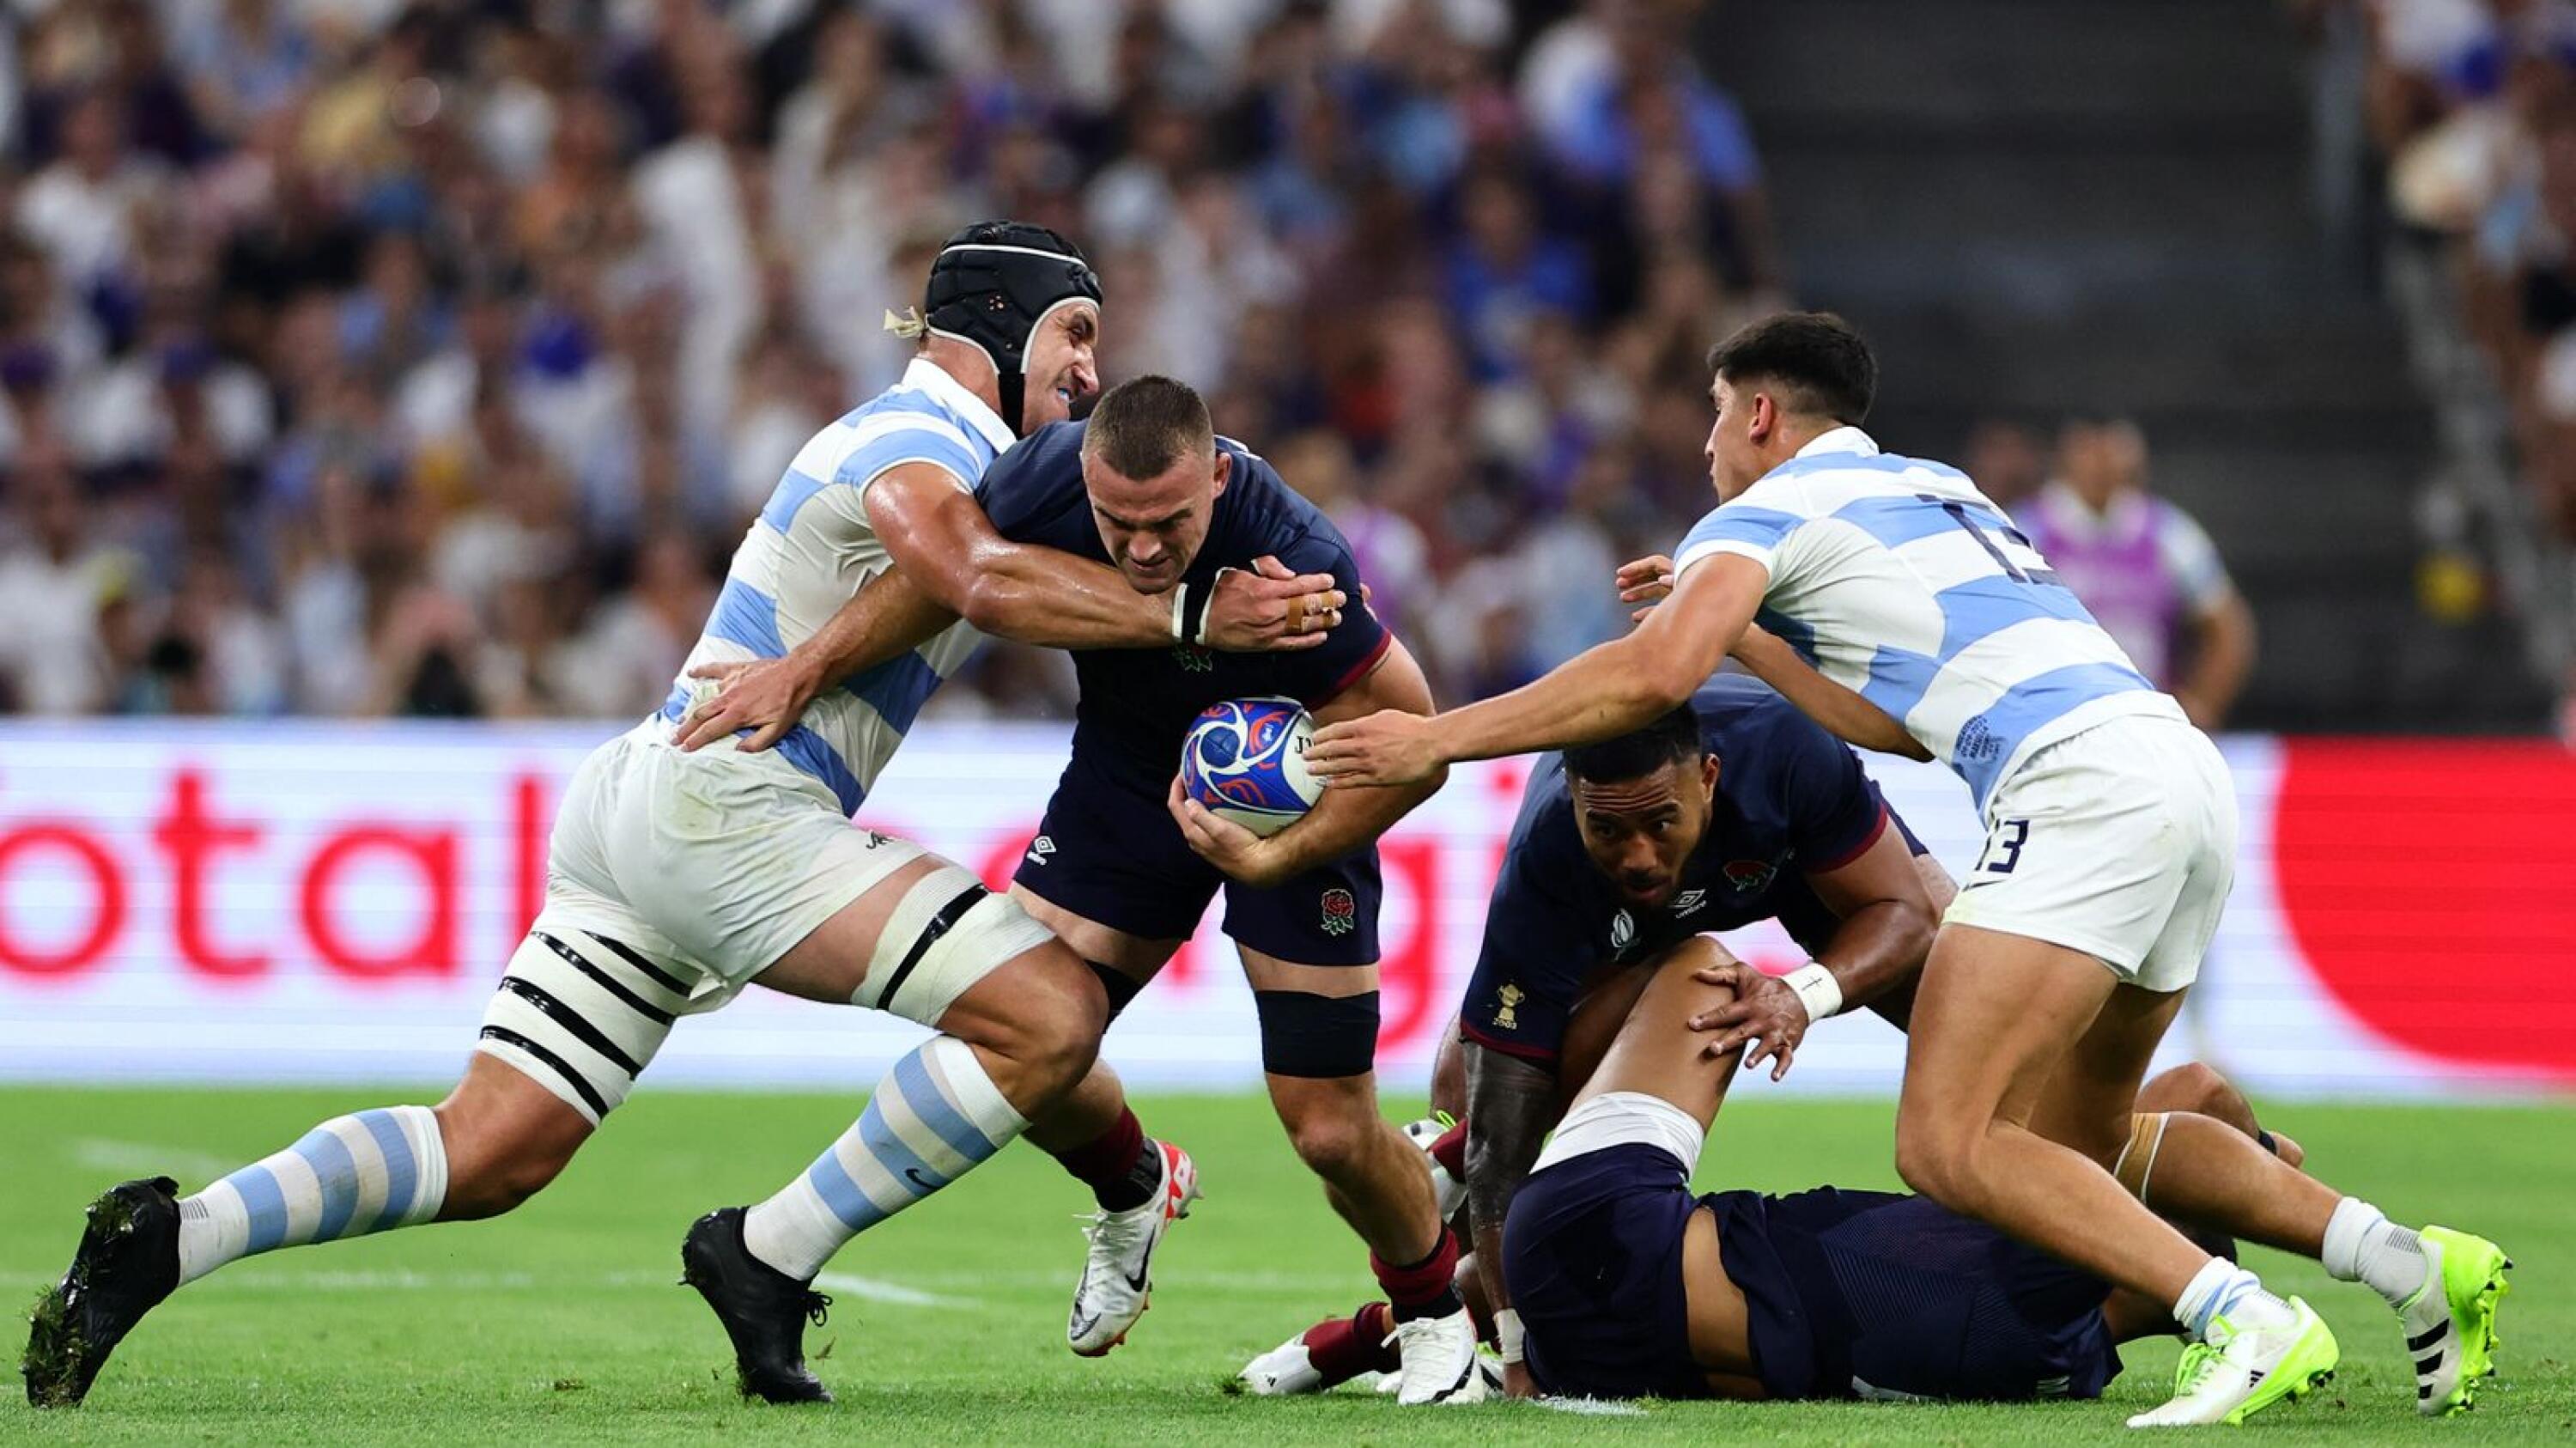 England's number eight Ben Earl runs with the ball during their Rugby World Cup Pool D match against Argentina at Stade de Marseille in Marseille on Saturday